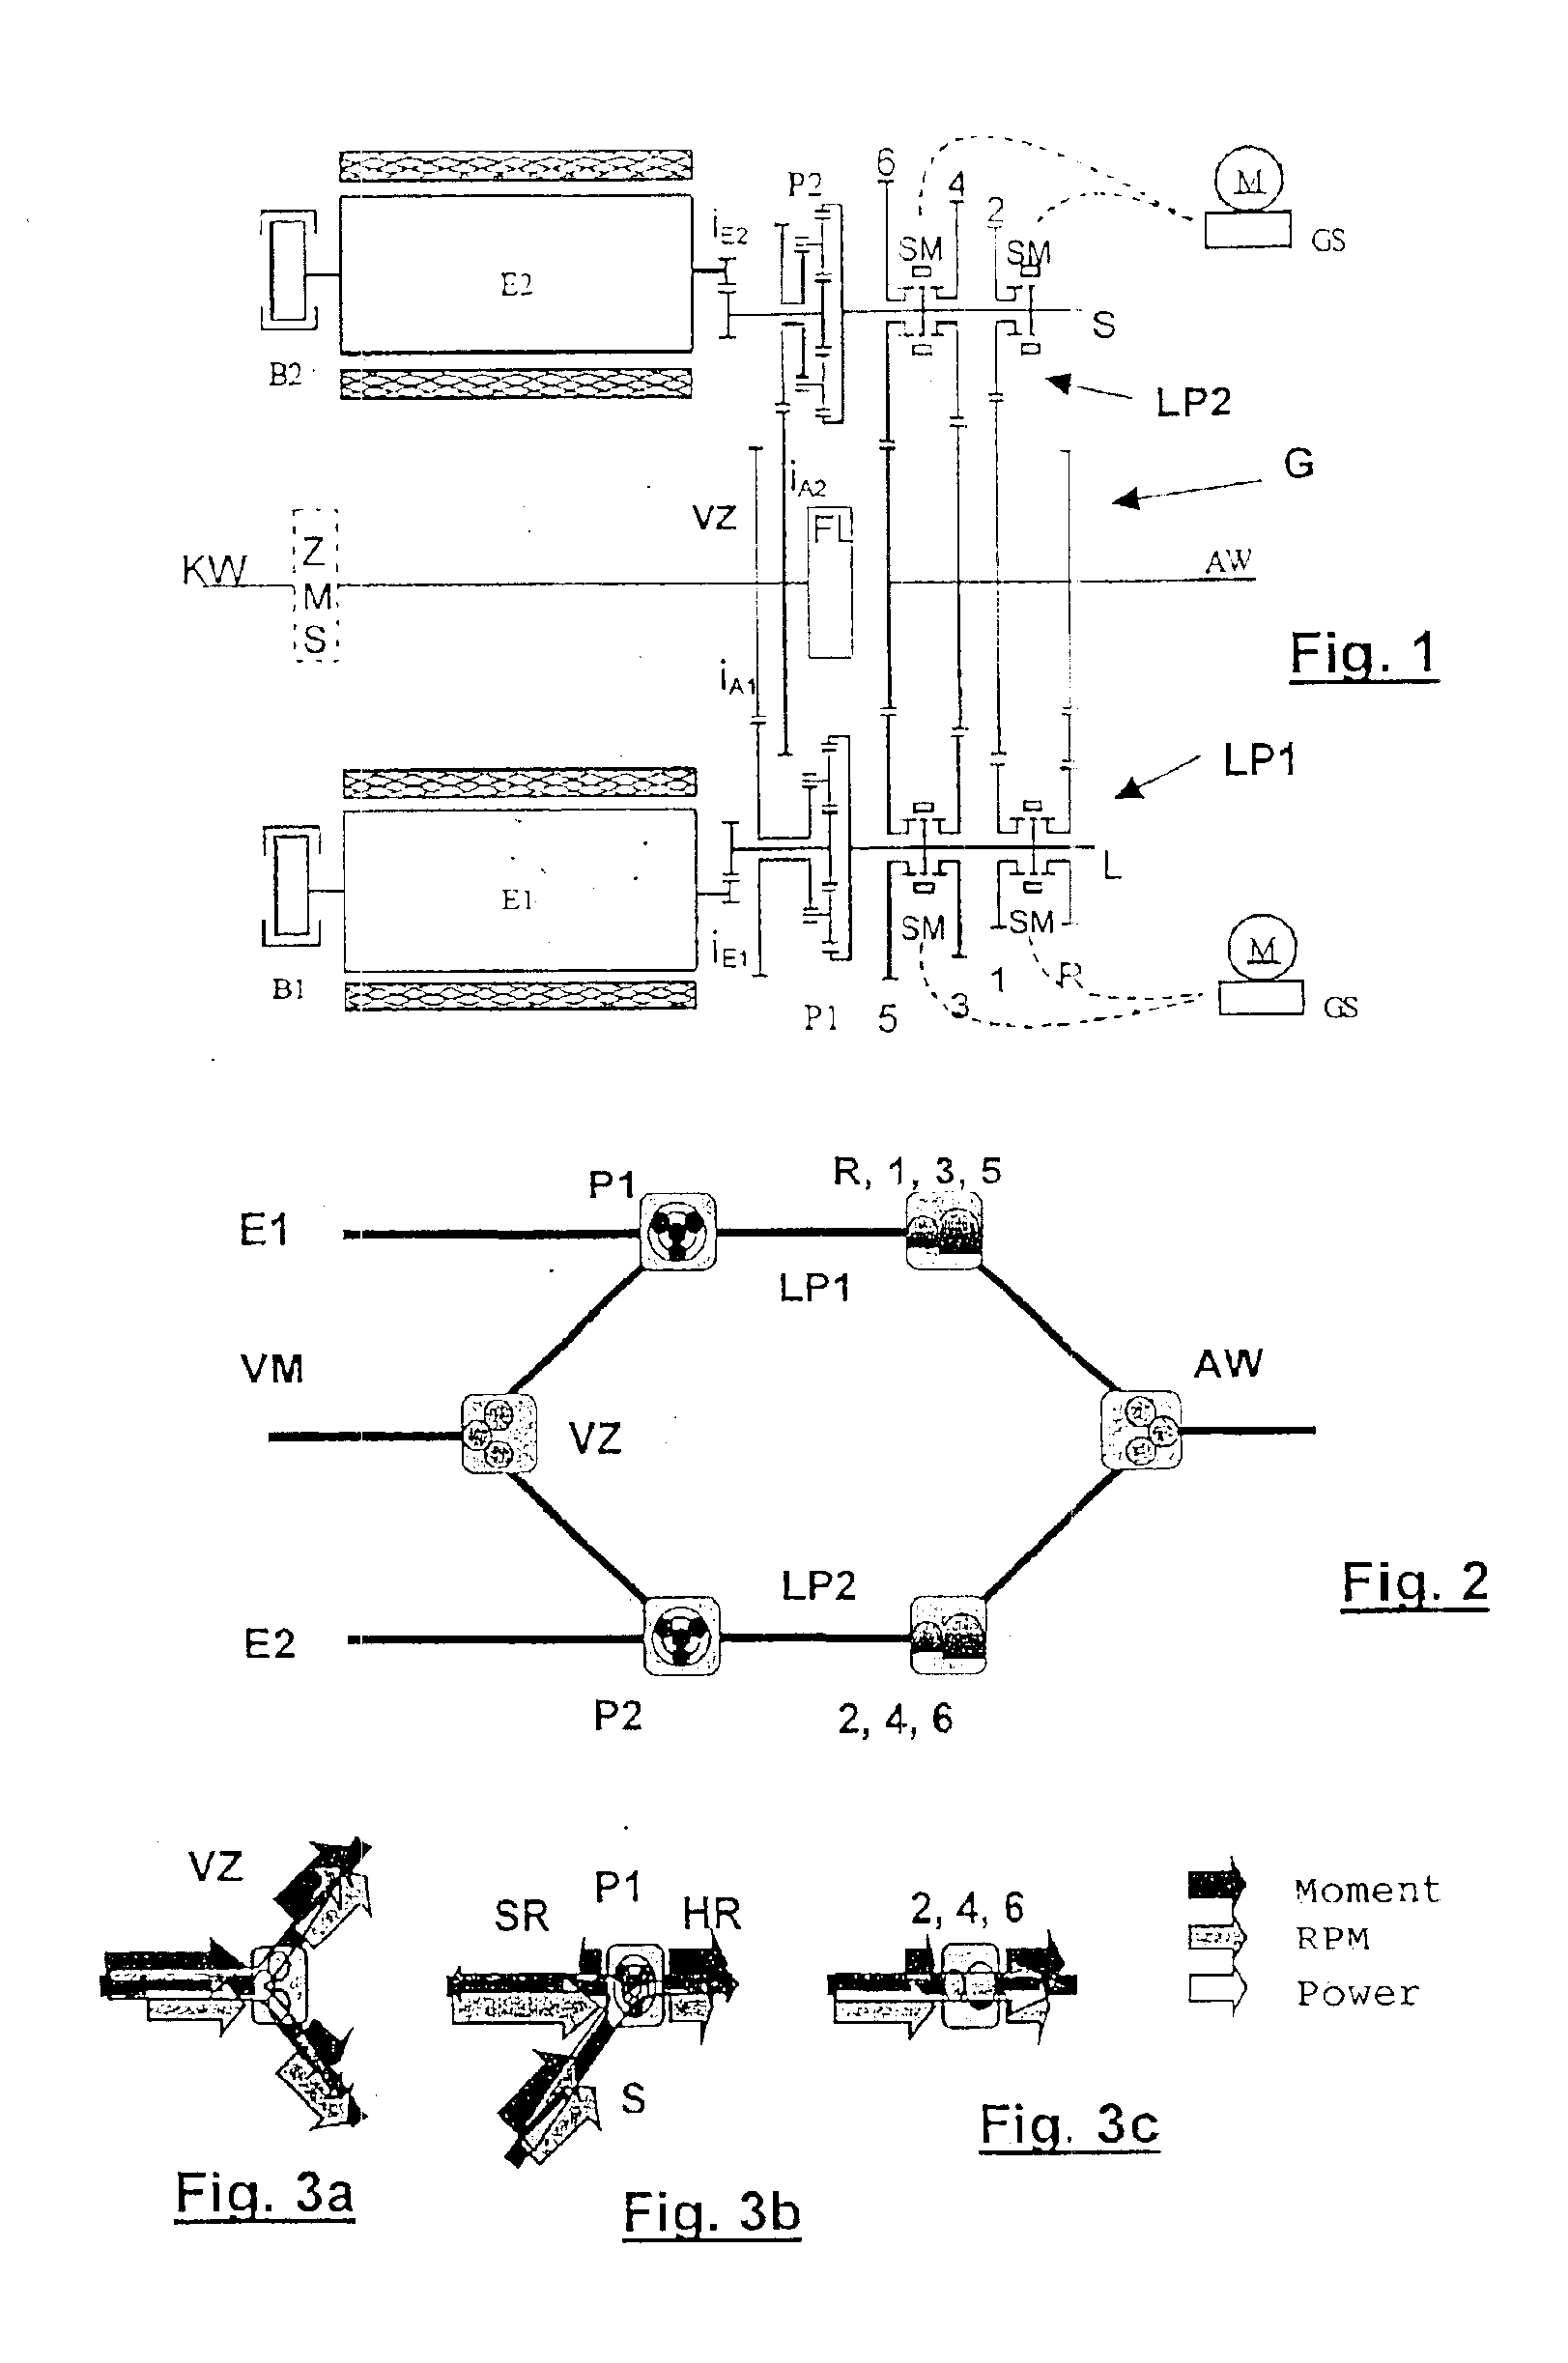 Methods for operating a motor vehicle driven by an internal combustion engine and by two electrical machines